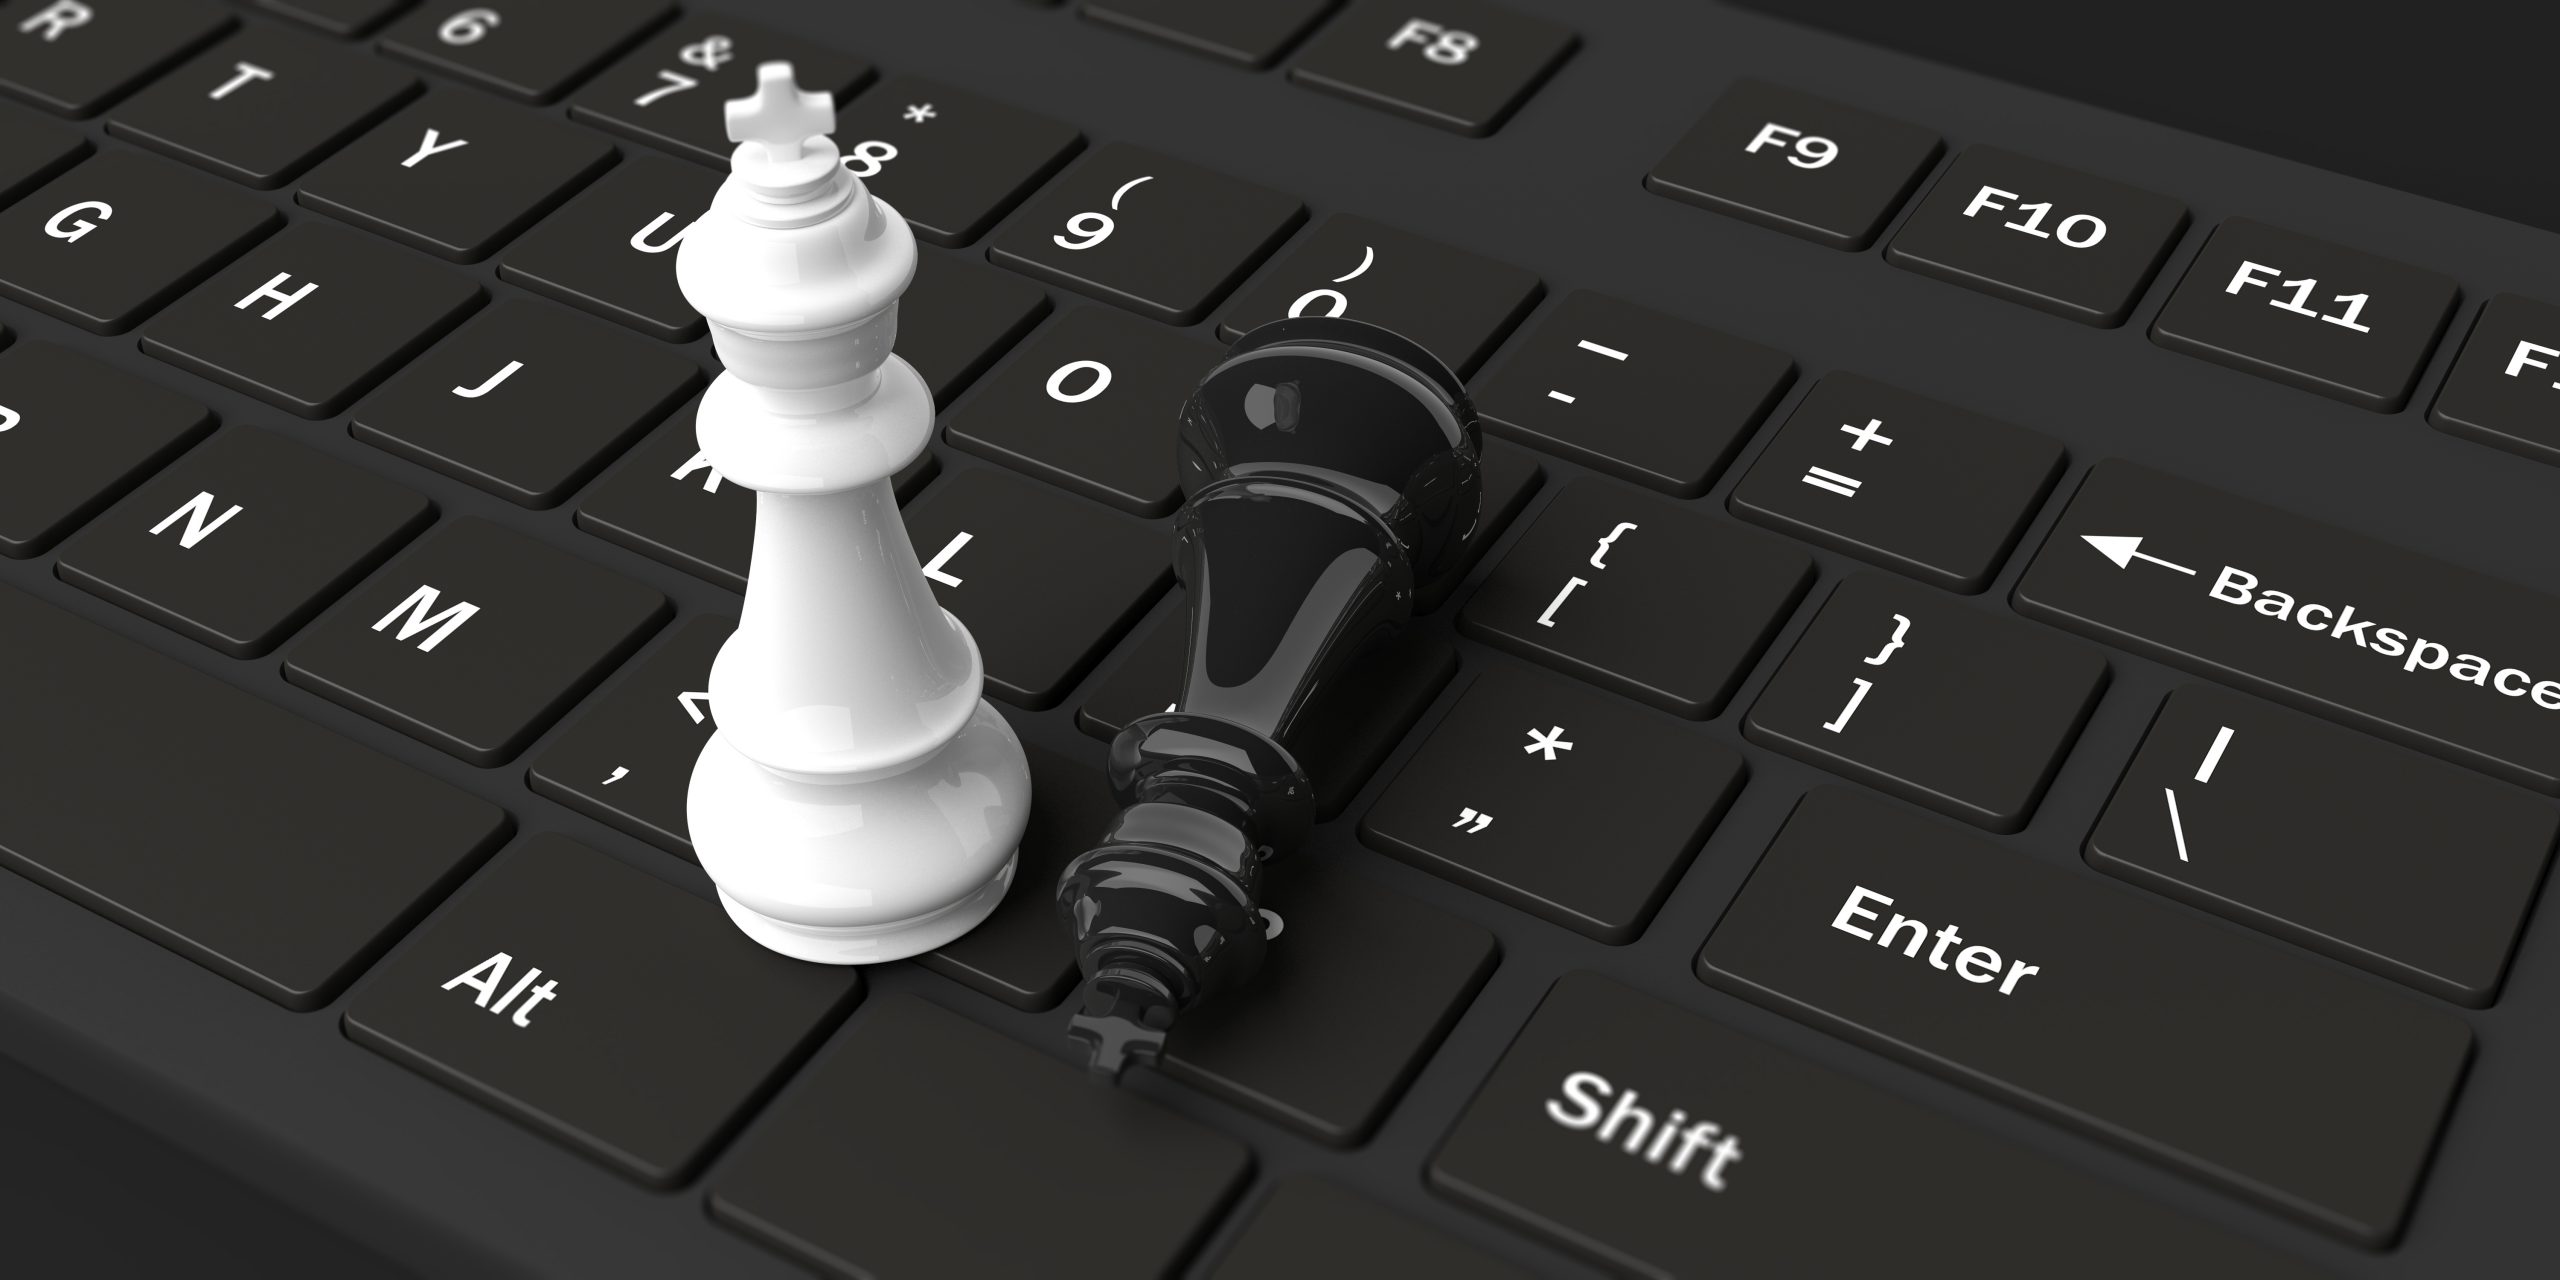 CHESS ONLINE - Play chess against computer or play live chess